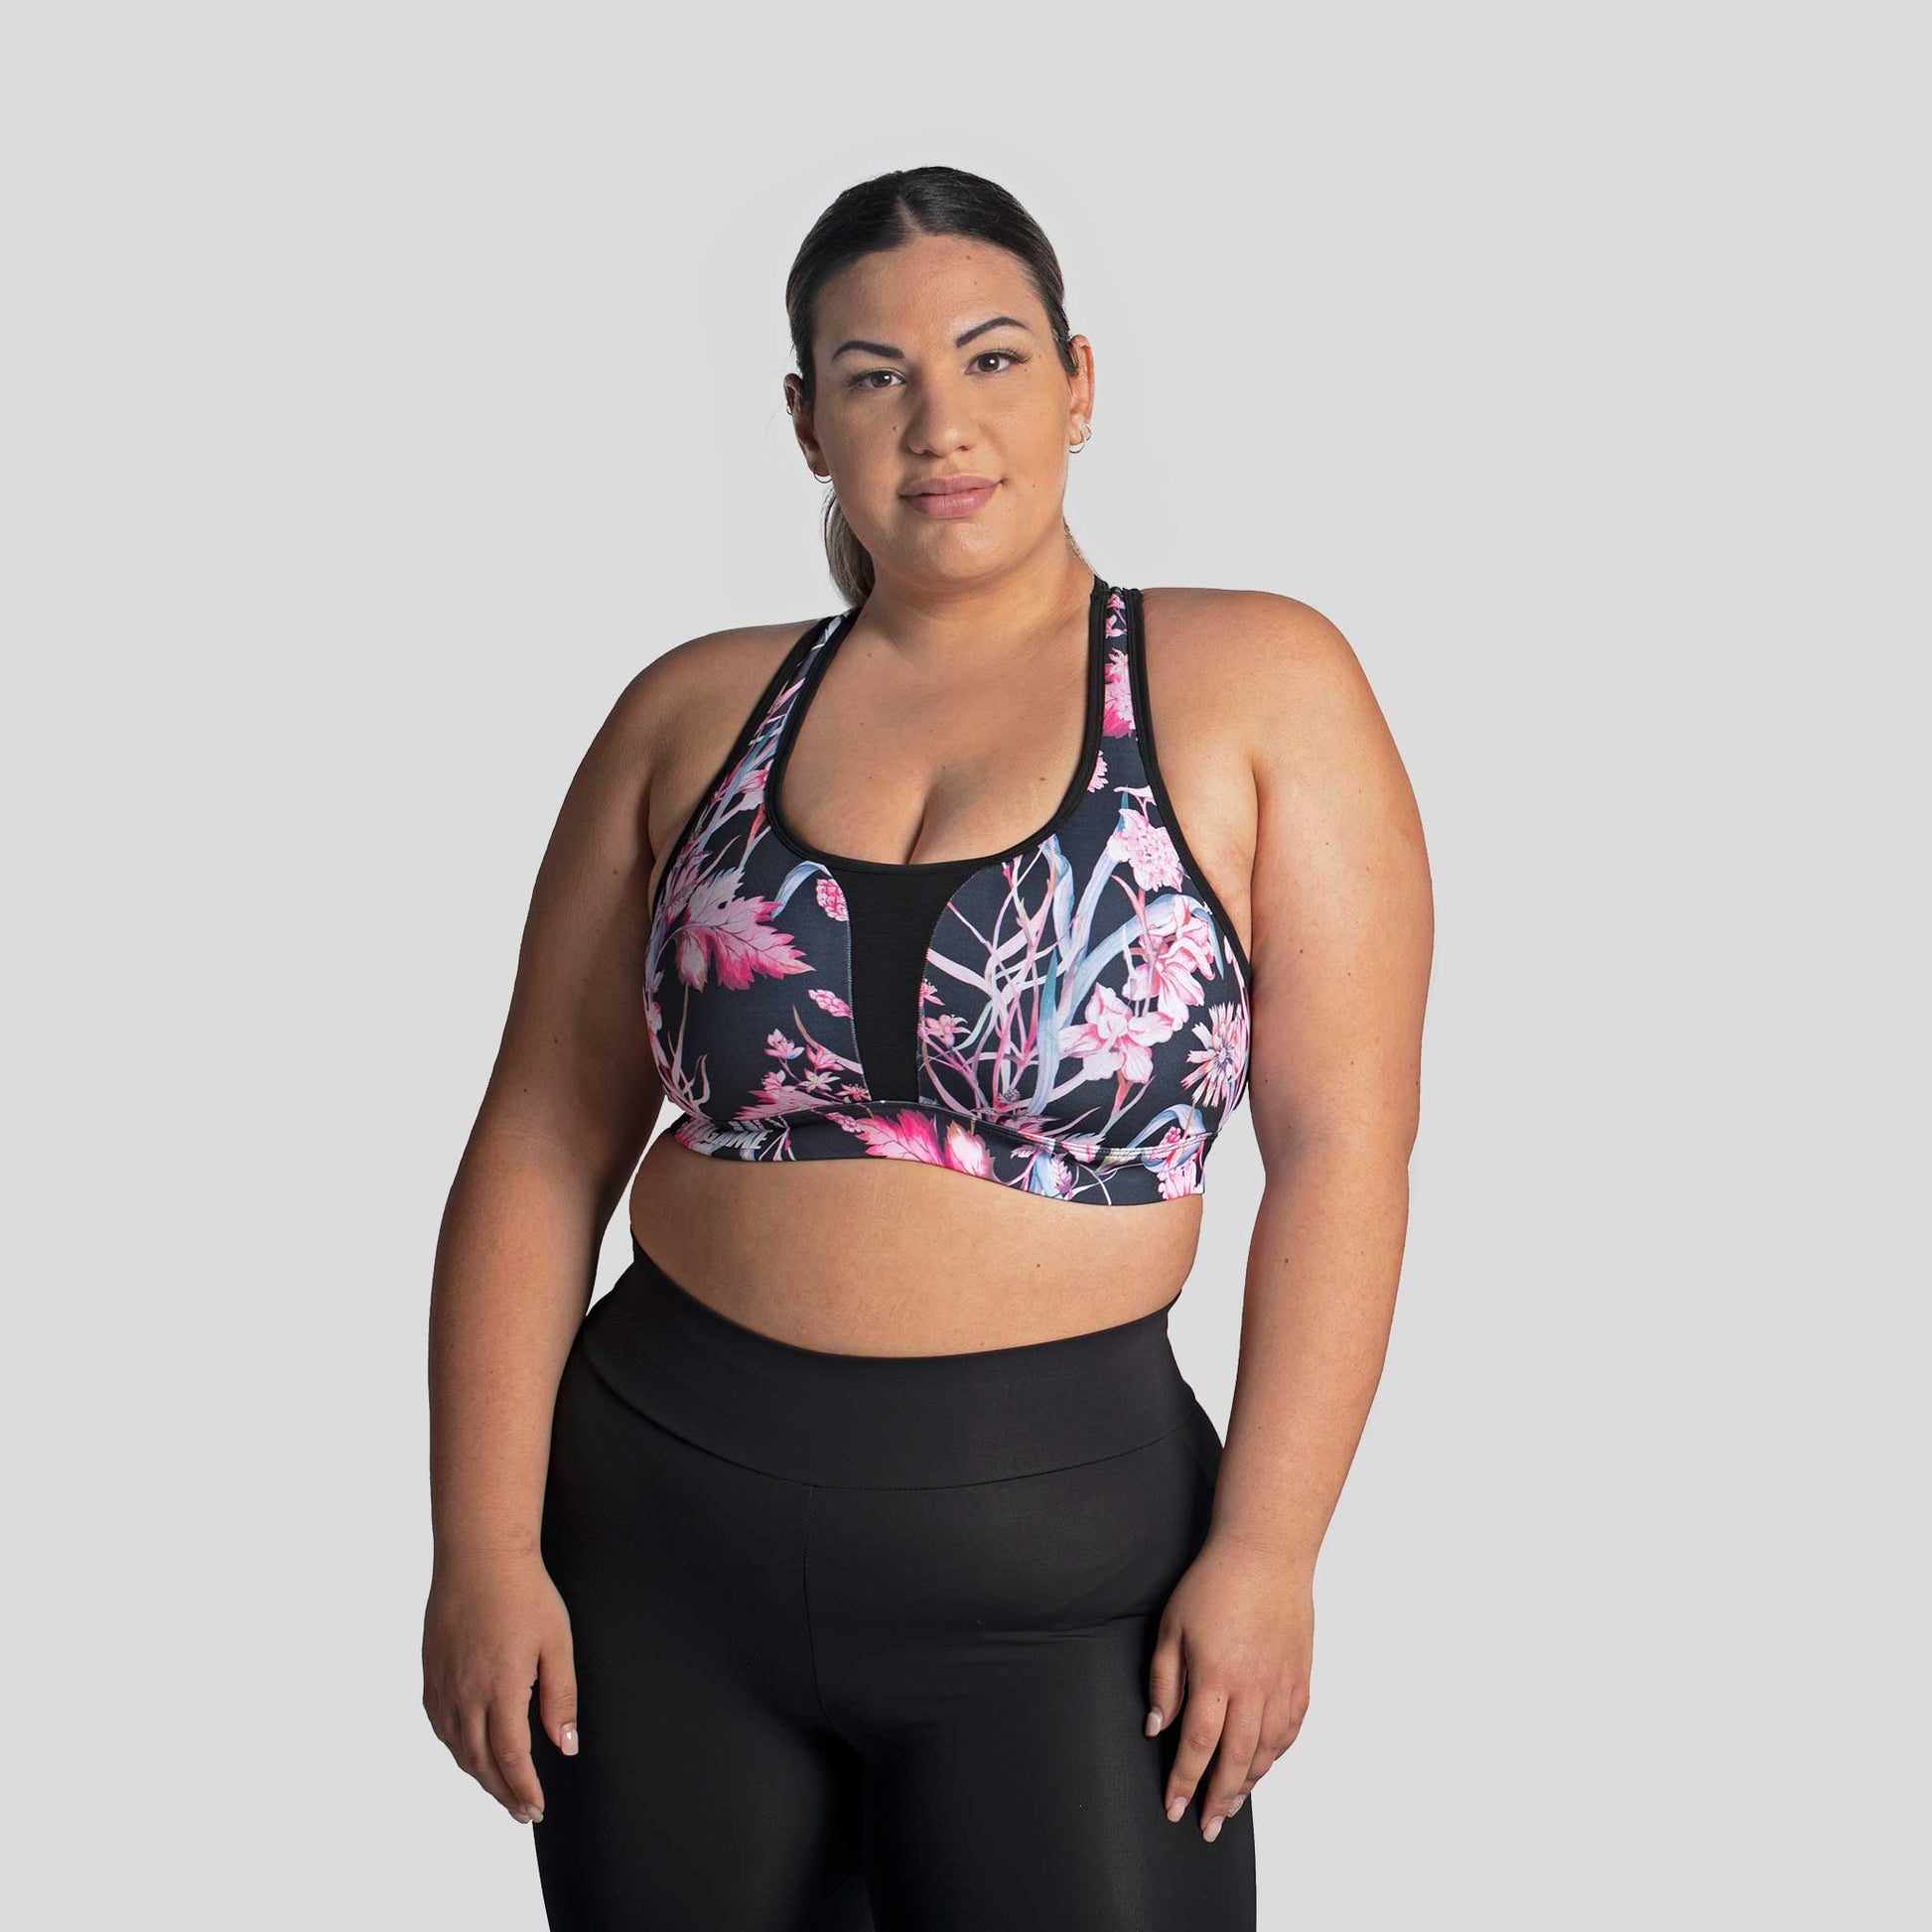 Stylish and supportive sports bra for curvy women in calico style